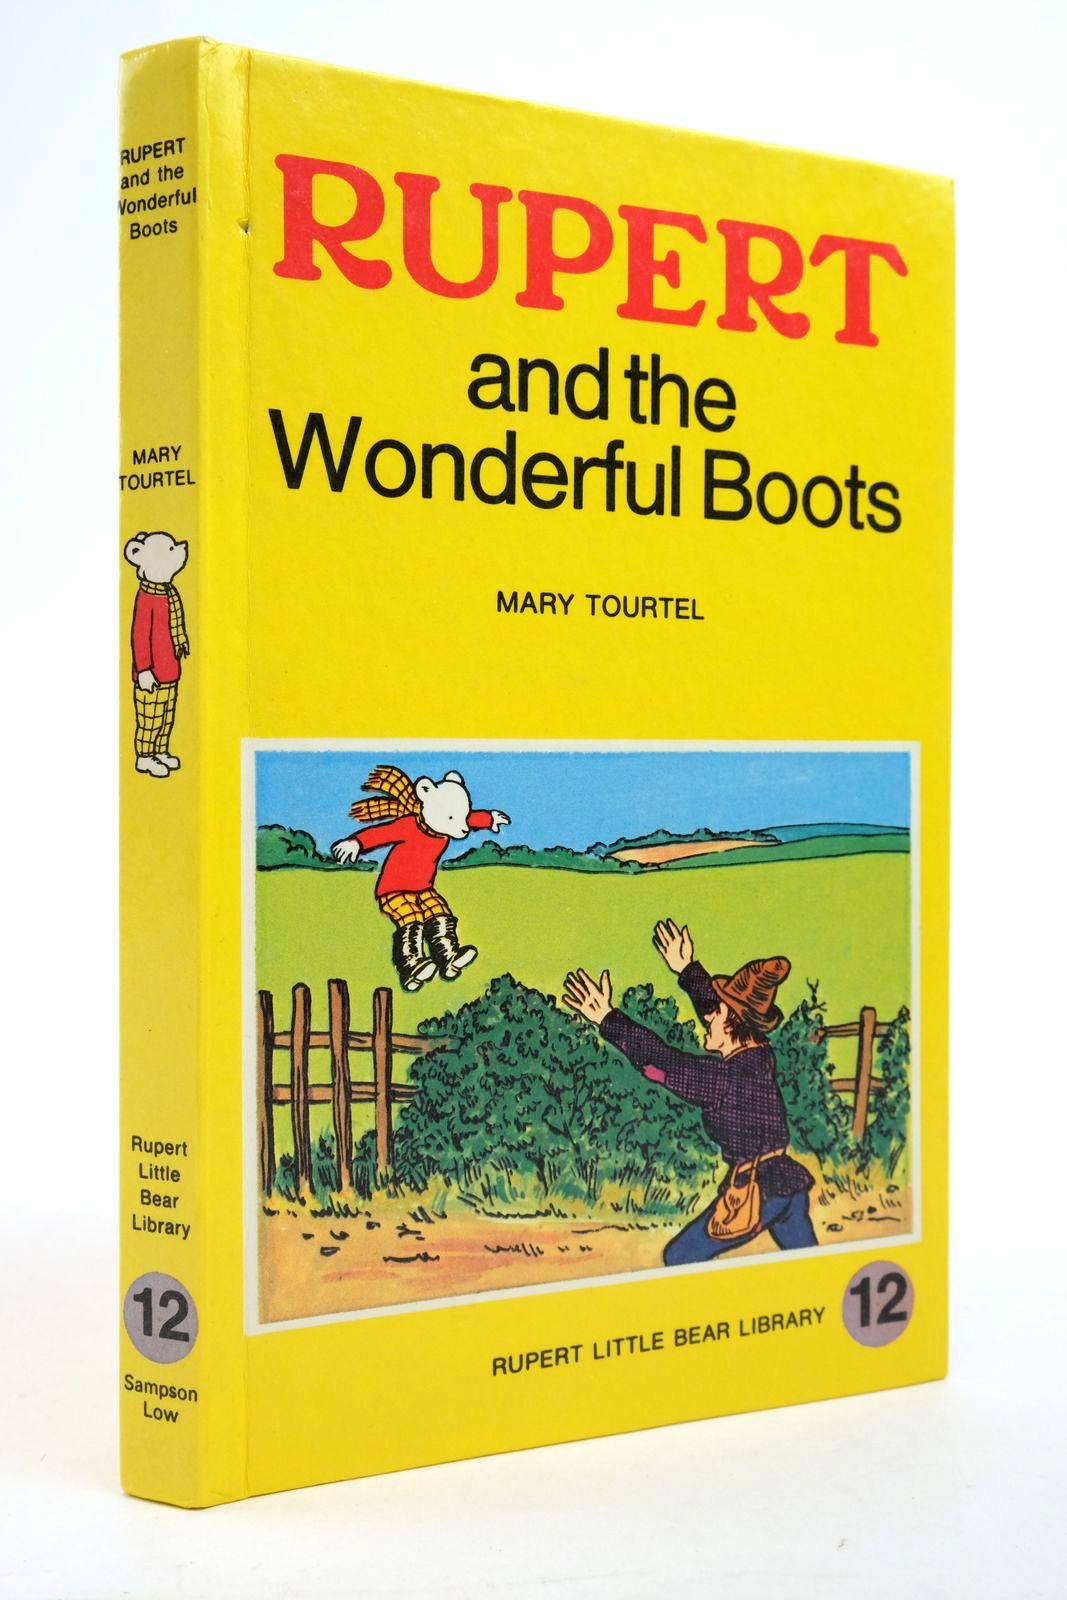 Photo of RUPERT AND THE WONDERFUL BOOTS - RUPERT LITTLE BEAR LIBRARY No. 12 (WOOLWORTH) written by Tourtel, Mary illustrated by Tourtel, Mary published by Sampson Low, Marston & Co. Ltd. (STOCK CODE: 2136966)  for sale by Stella & Rose's Books